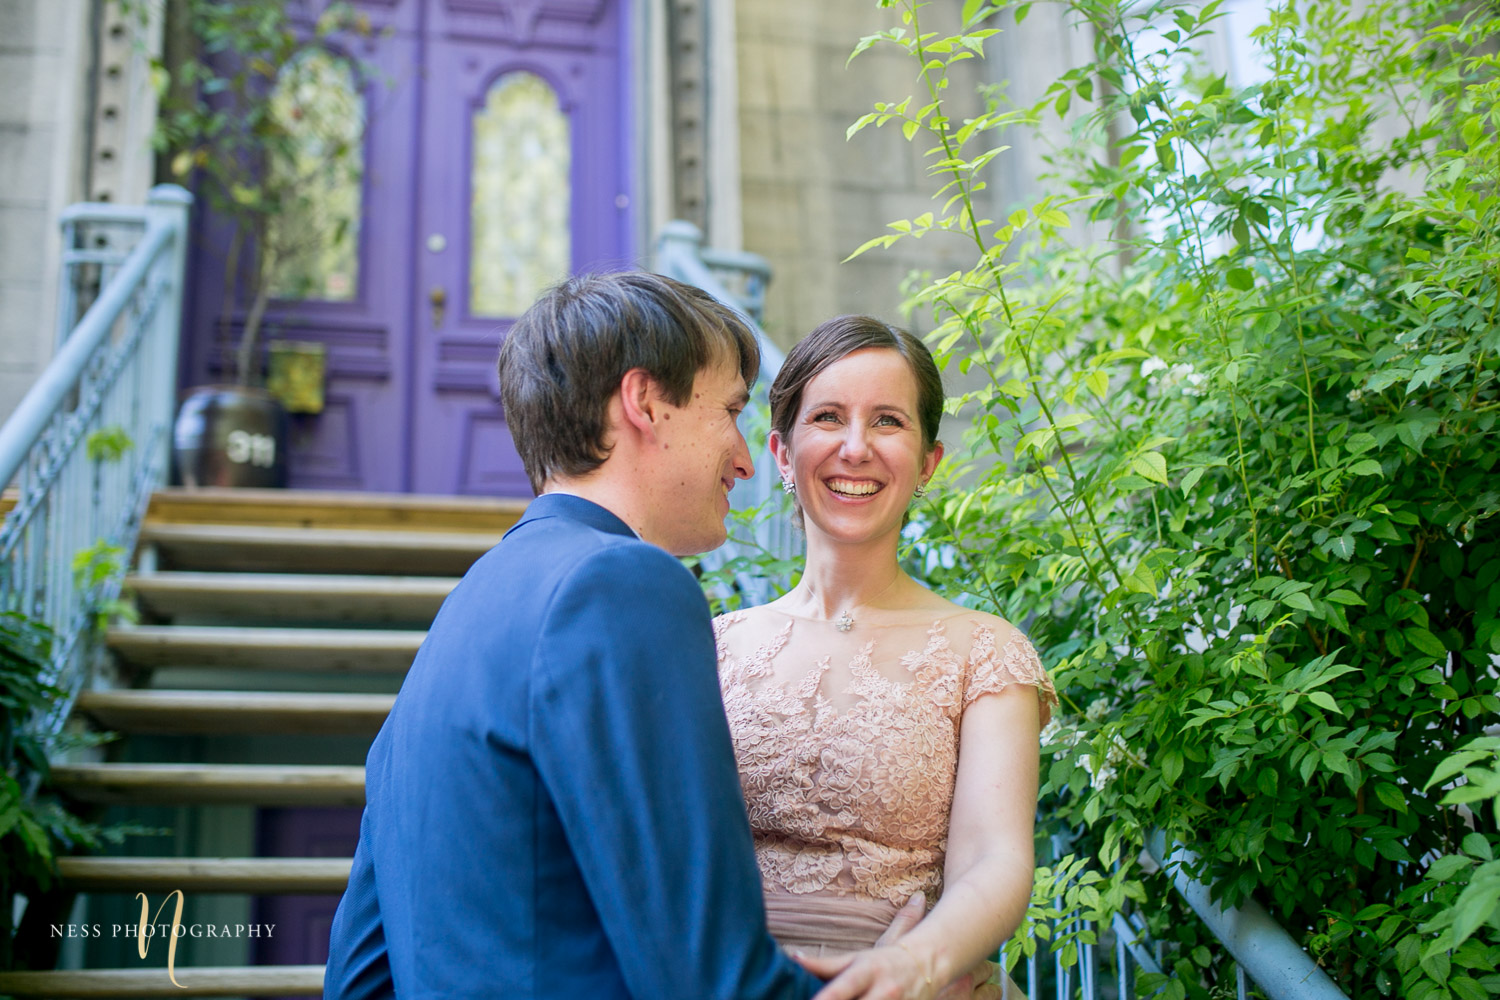 bride and groom laughing in front of purpule house in square saint louis